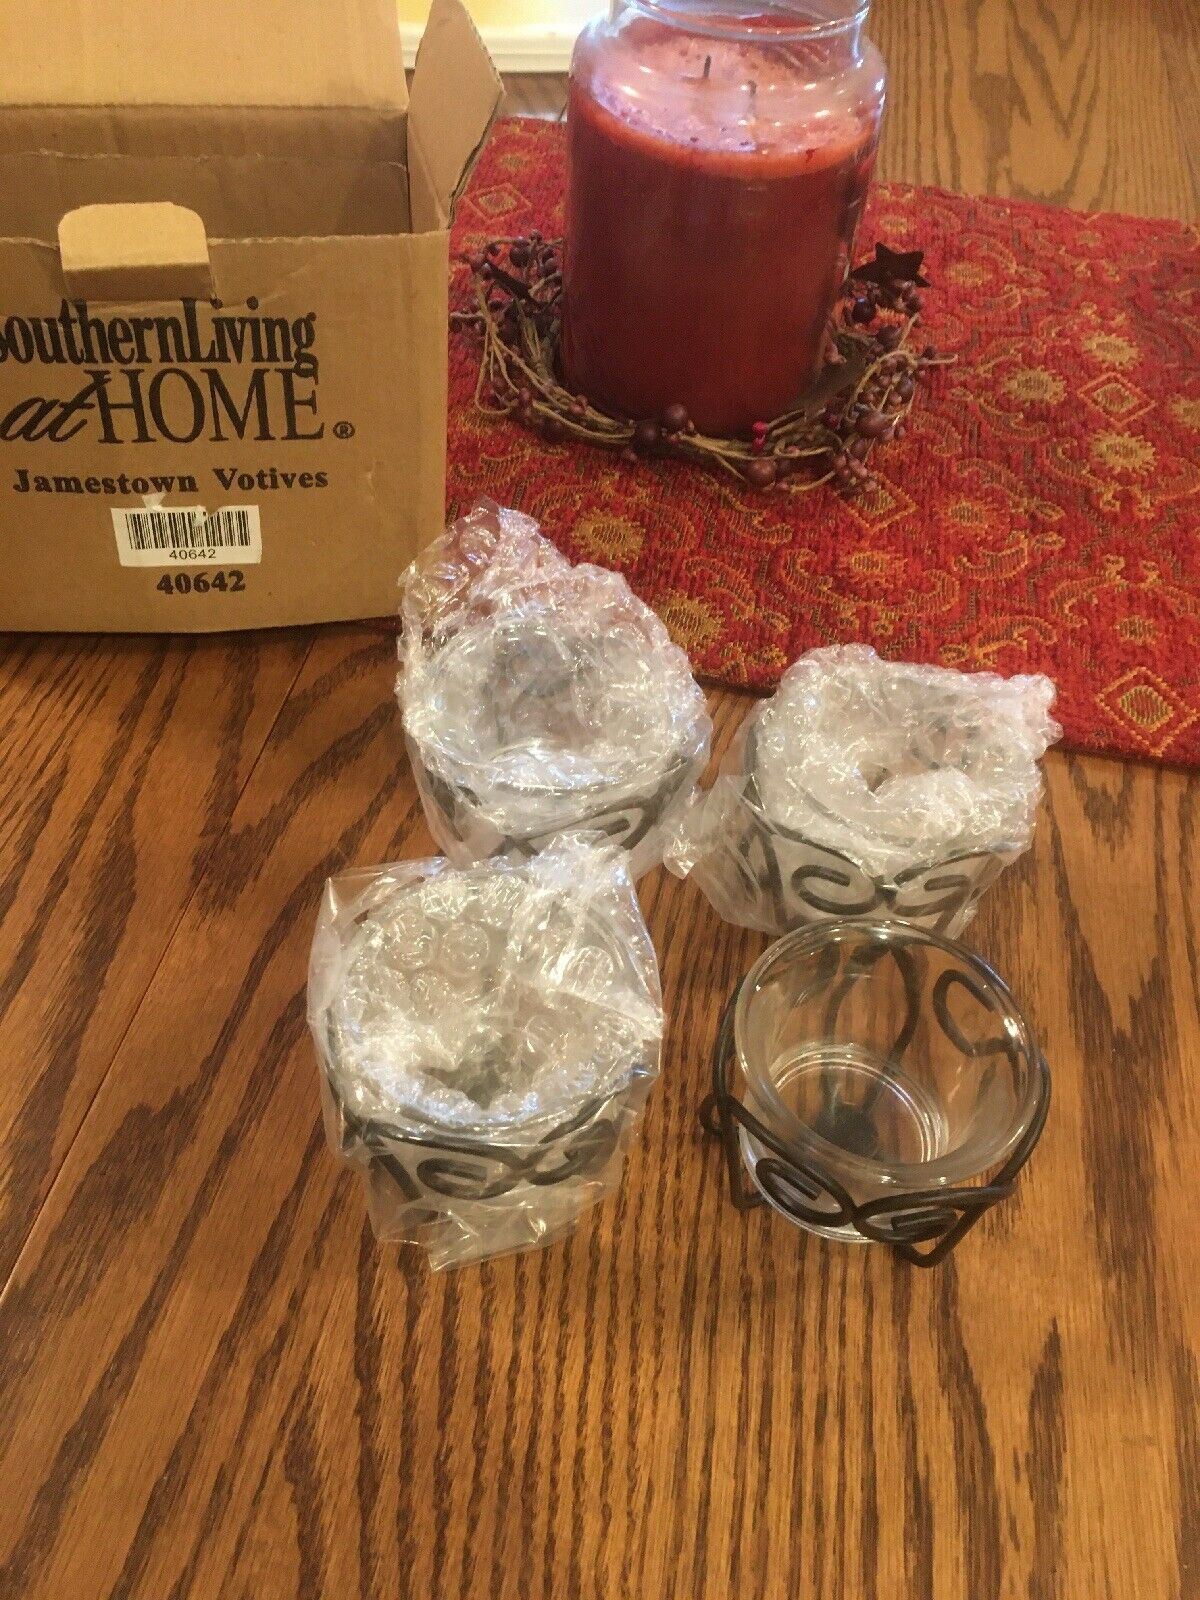 Southern Living at Home - Jamestown candle votive set of 4 NIB - $19.75